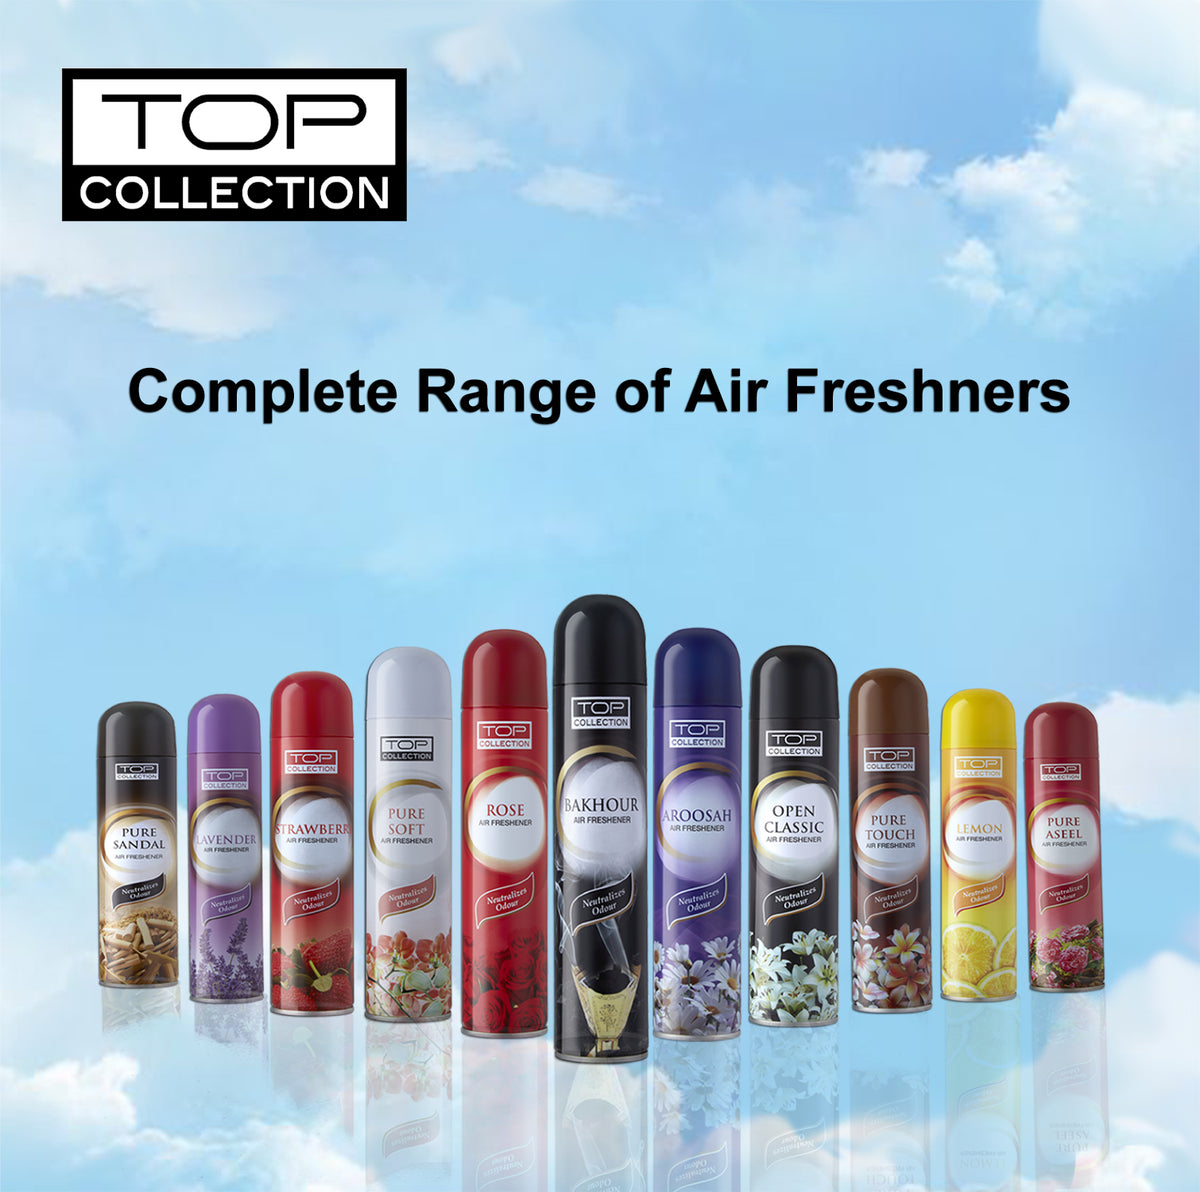 Top Collection Air Freshener - Open Classic, 300ml